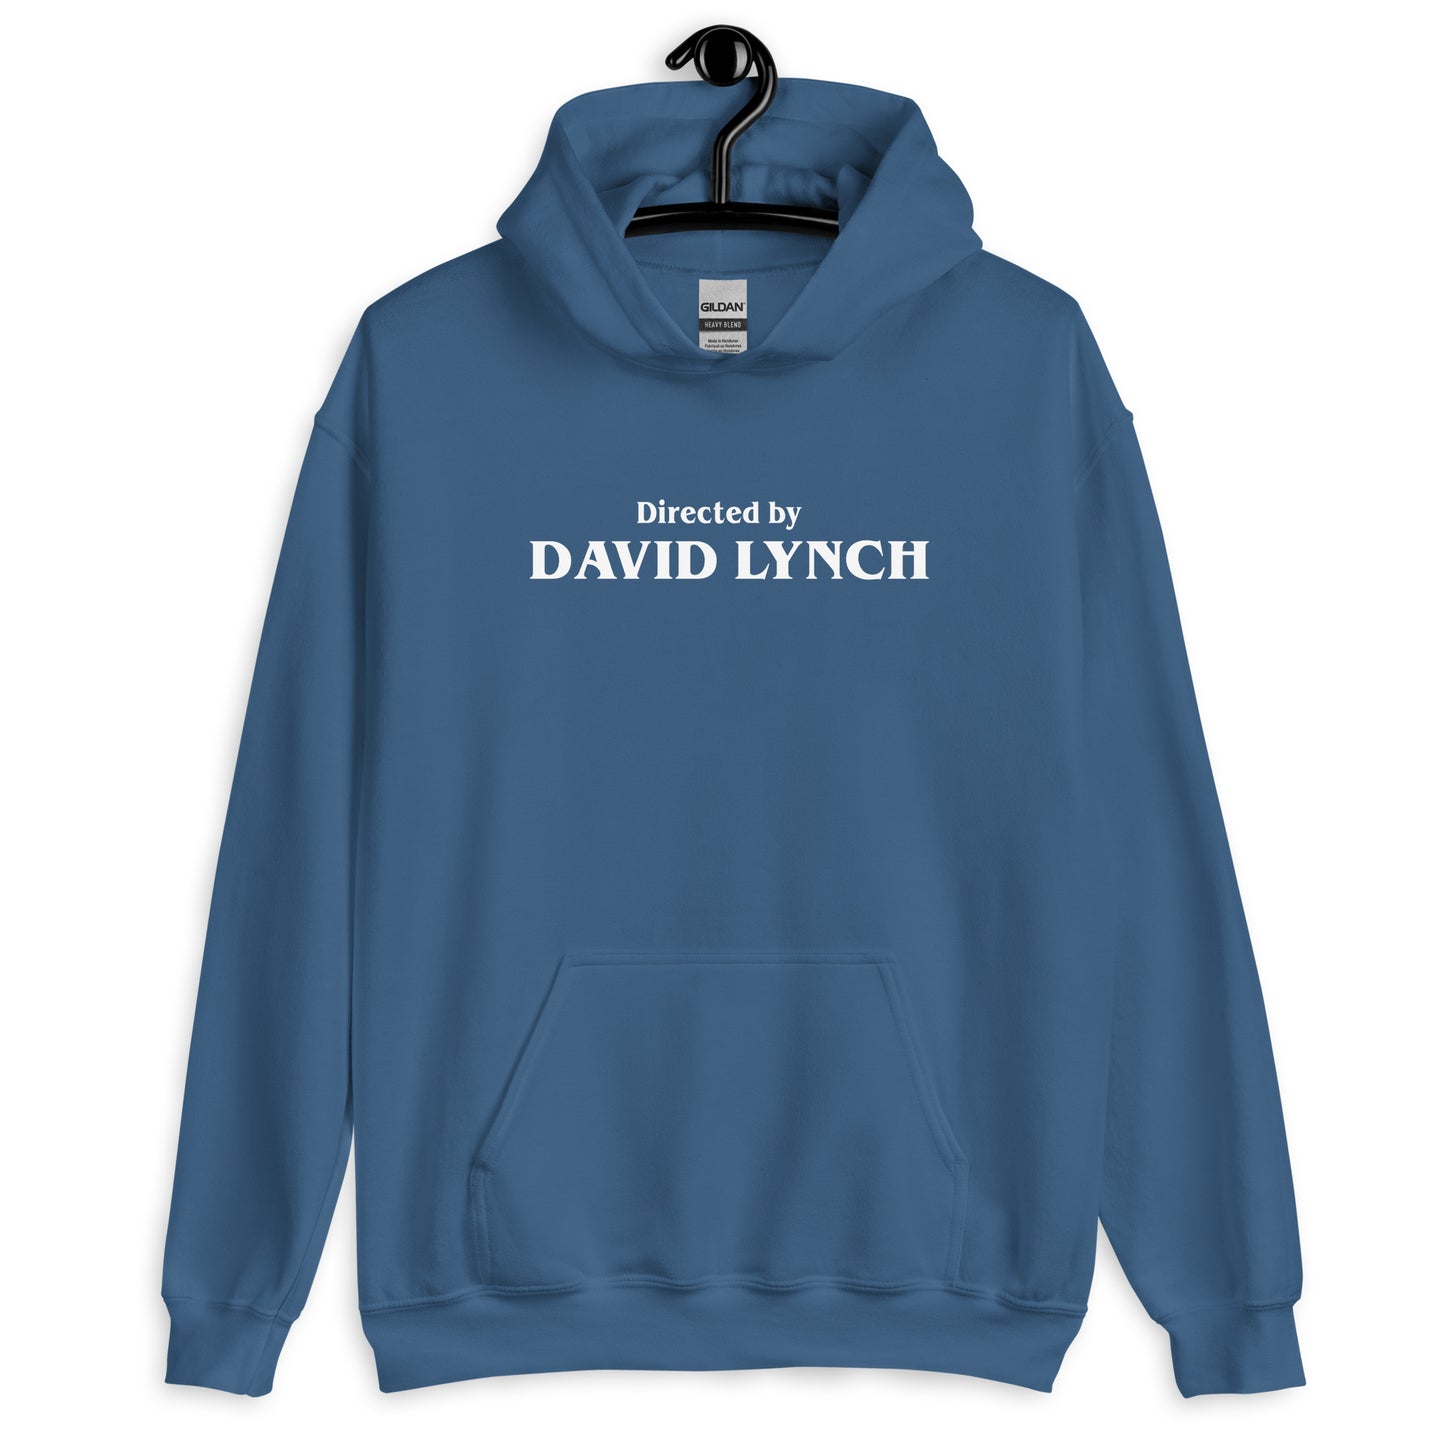 Directed by David Lynch Unisex Hoodie